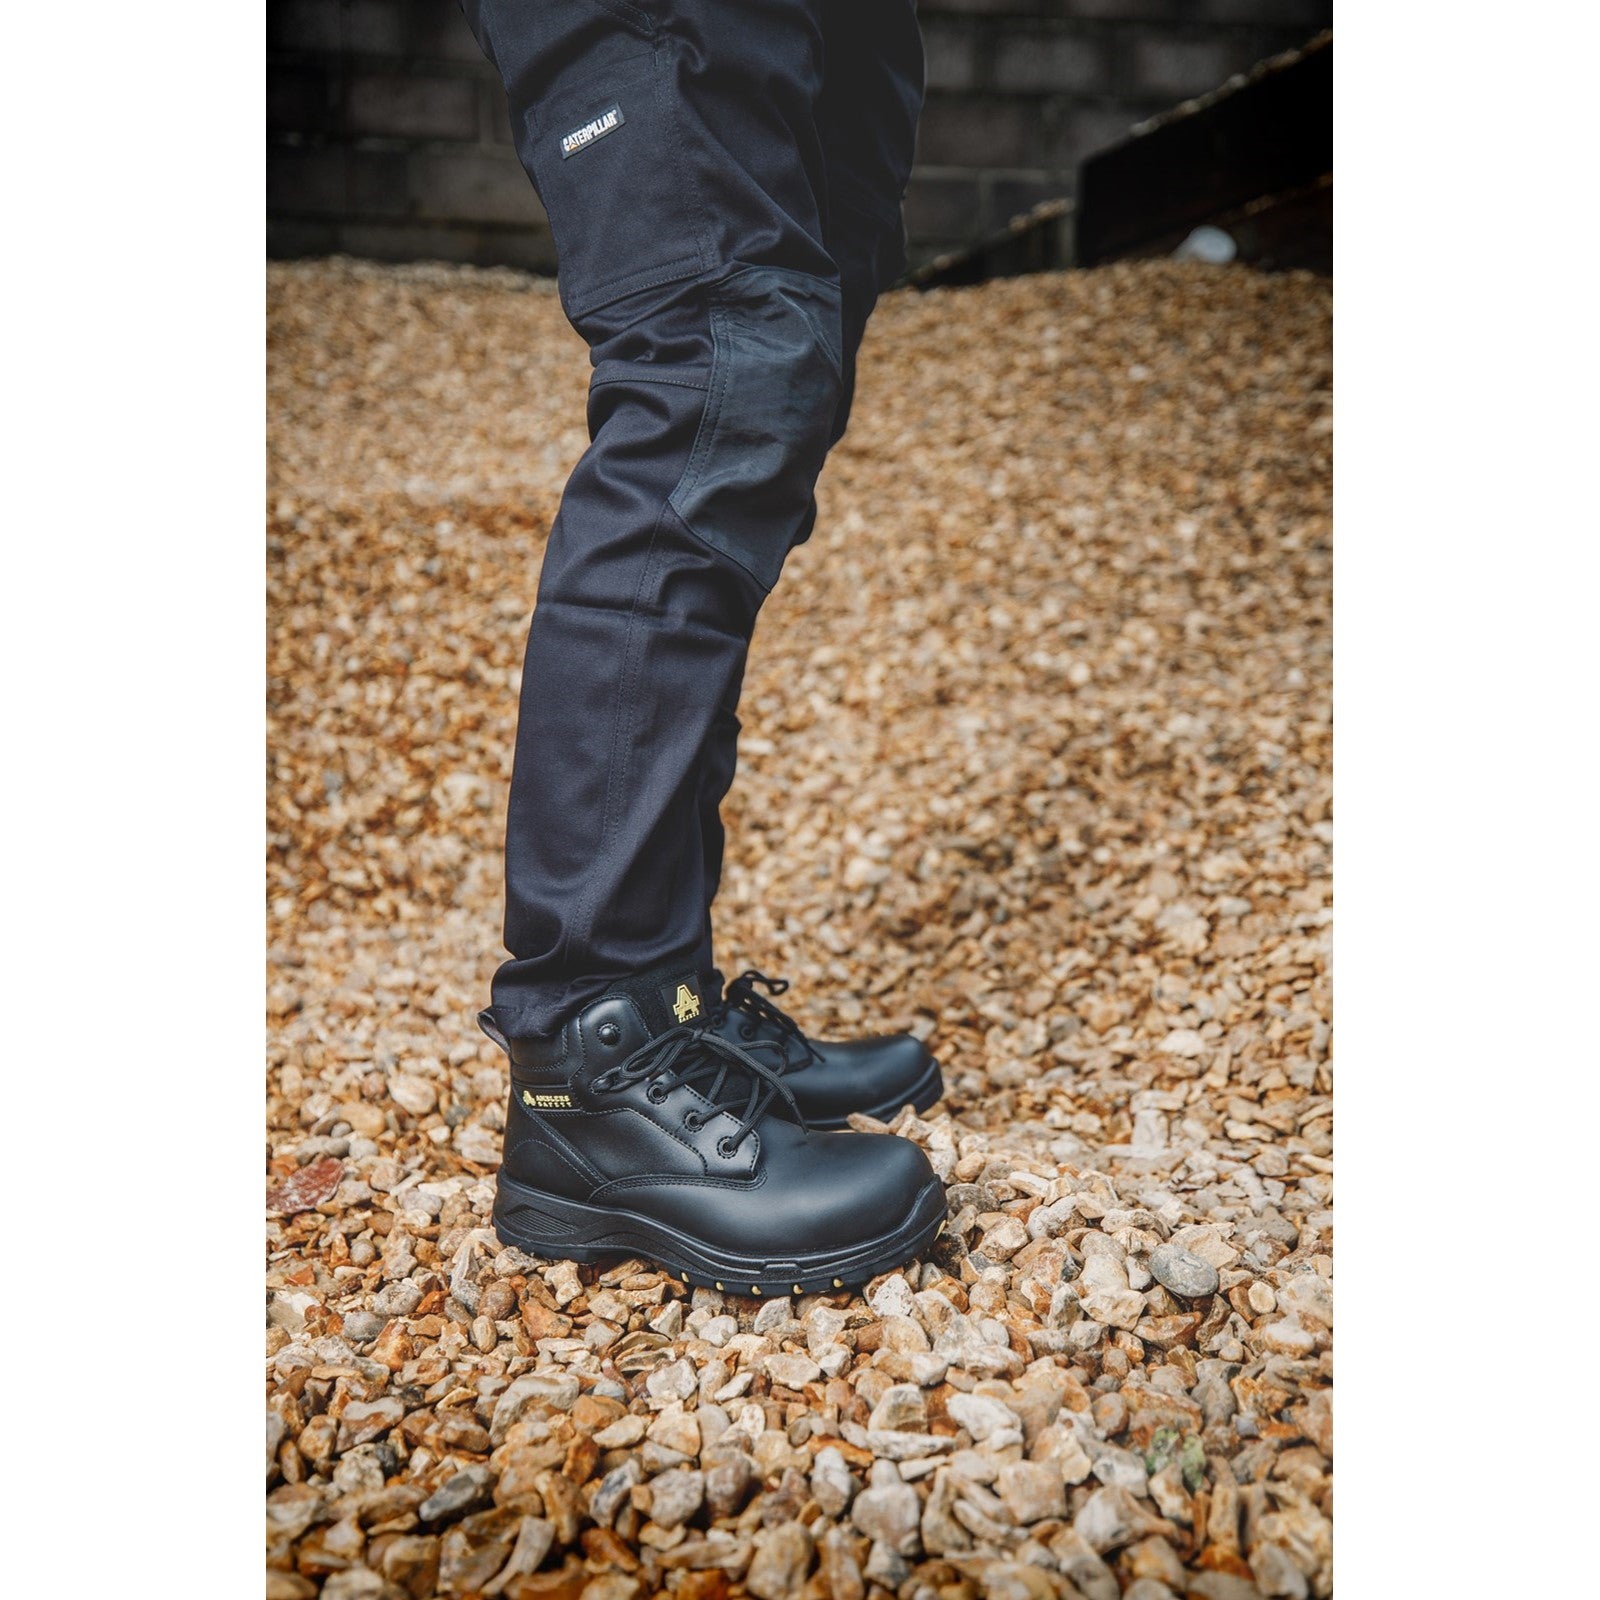 Amblers AS605C Safety Boots